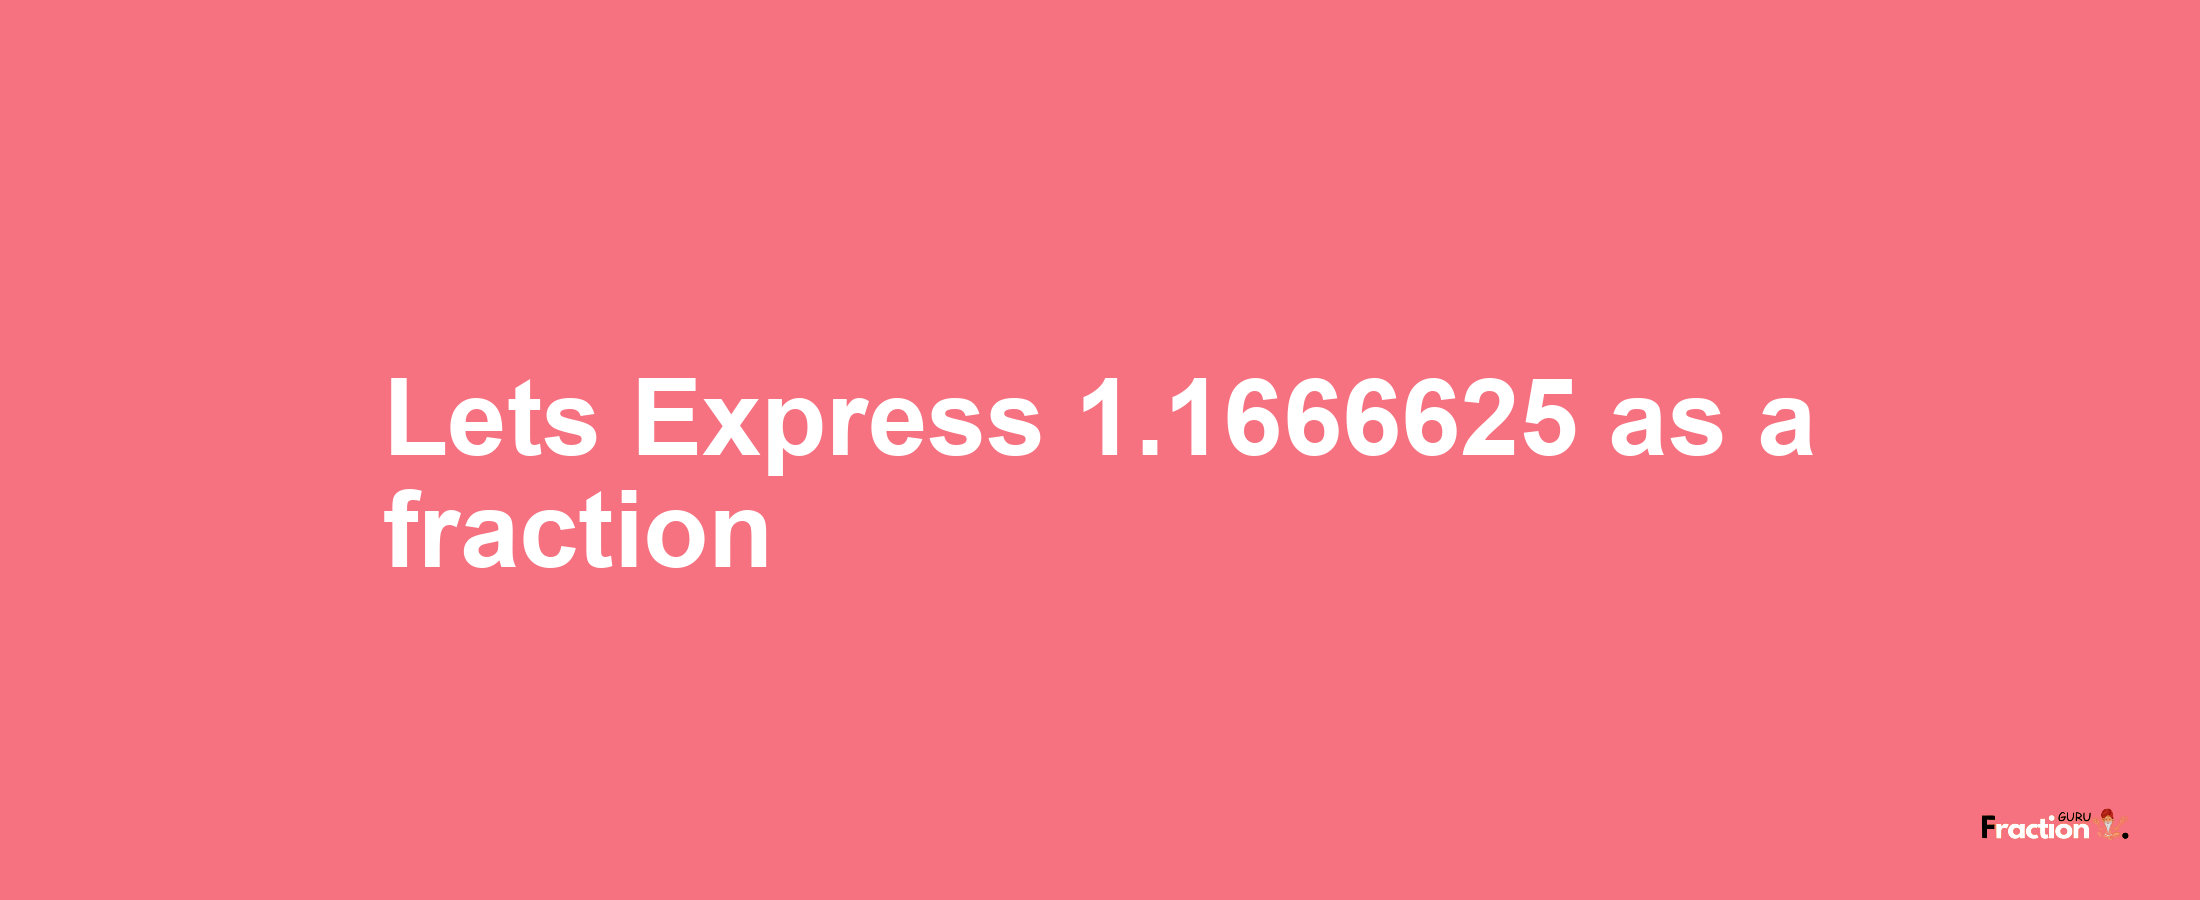 Lets Express 1.1666625 as afraction